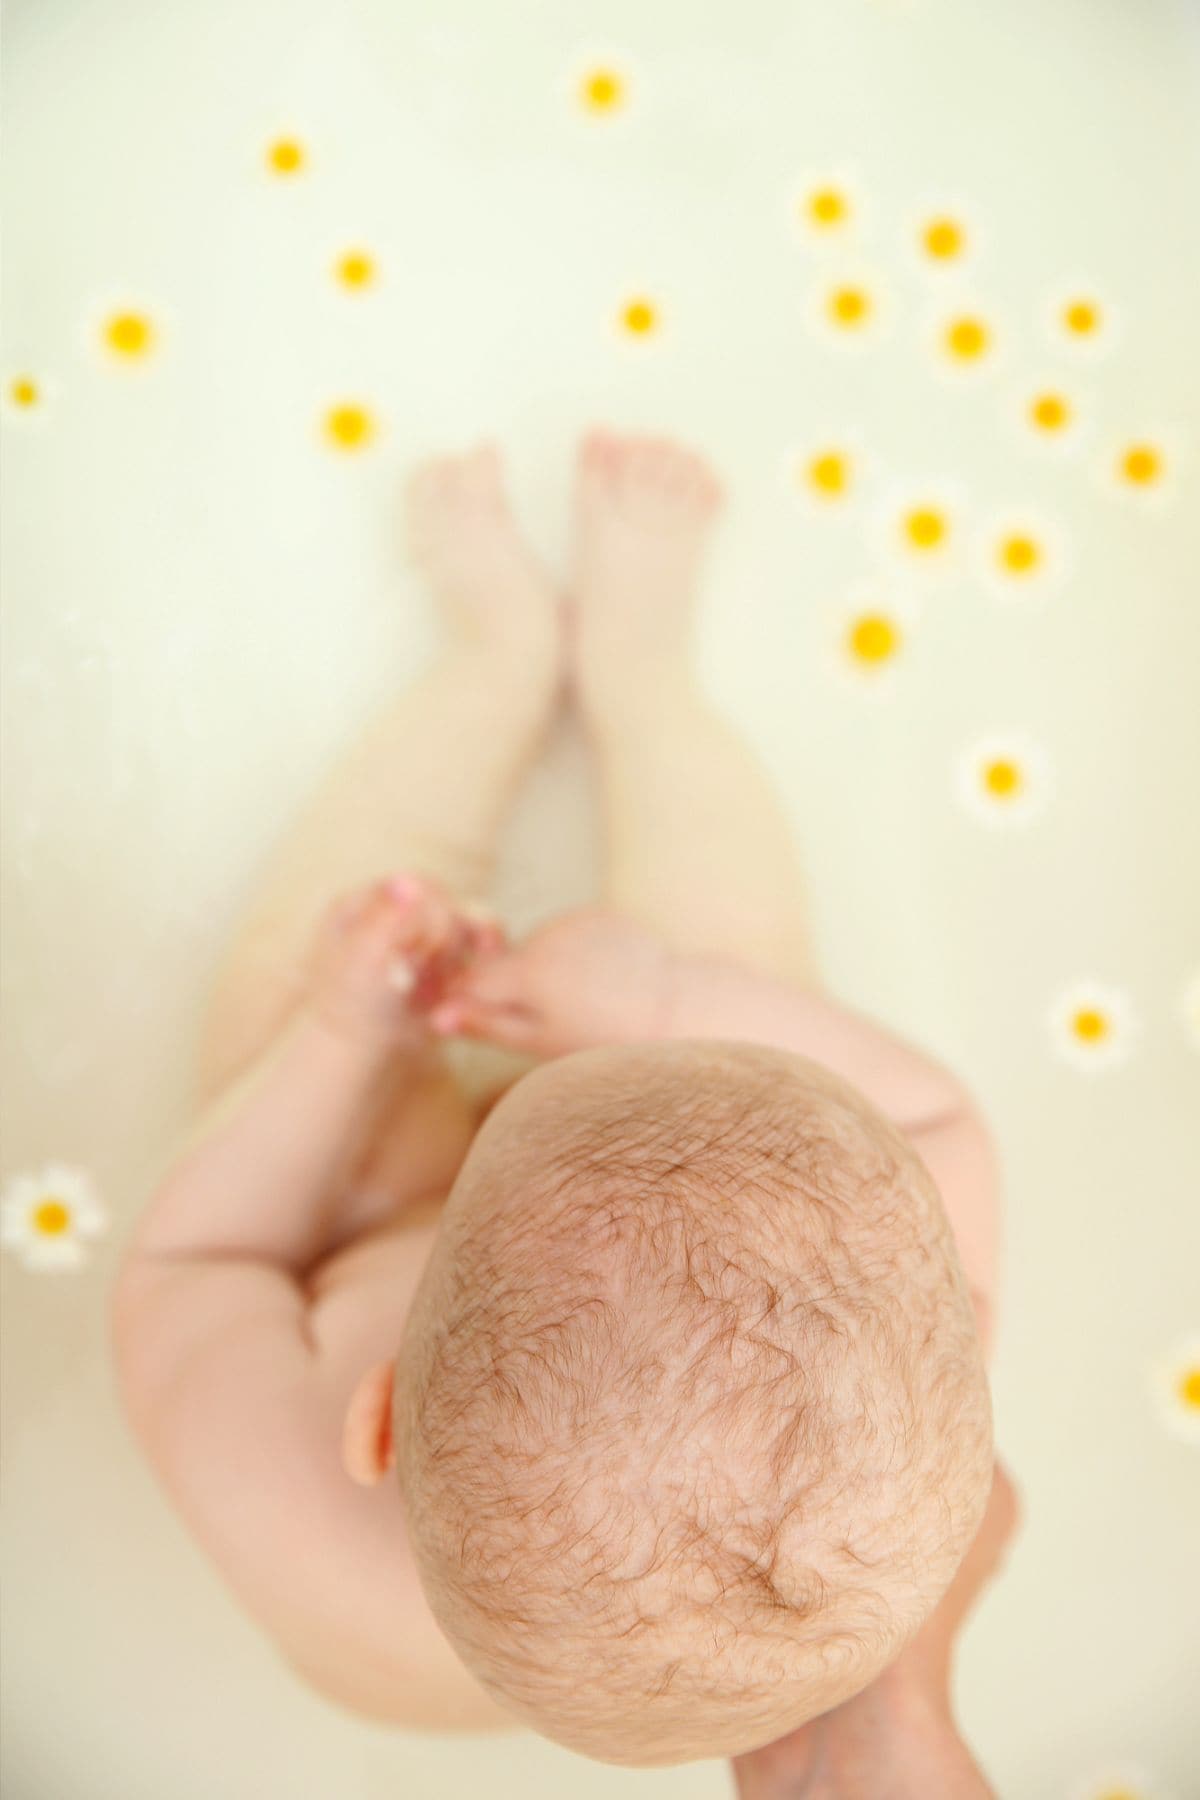 baby in chamomile bath to soothe teething pain